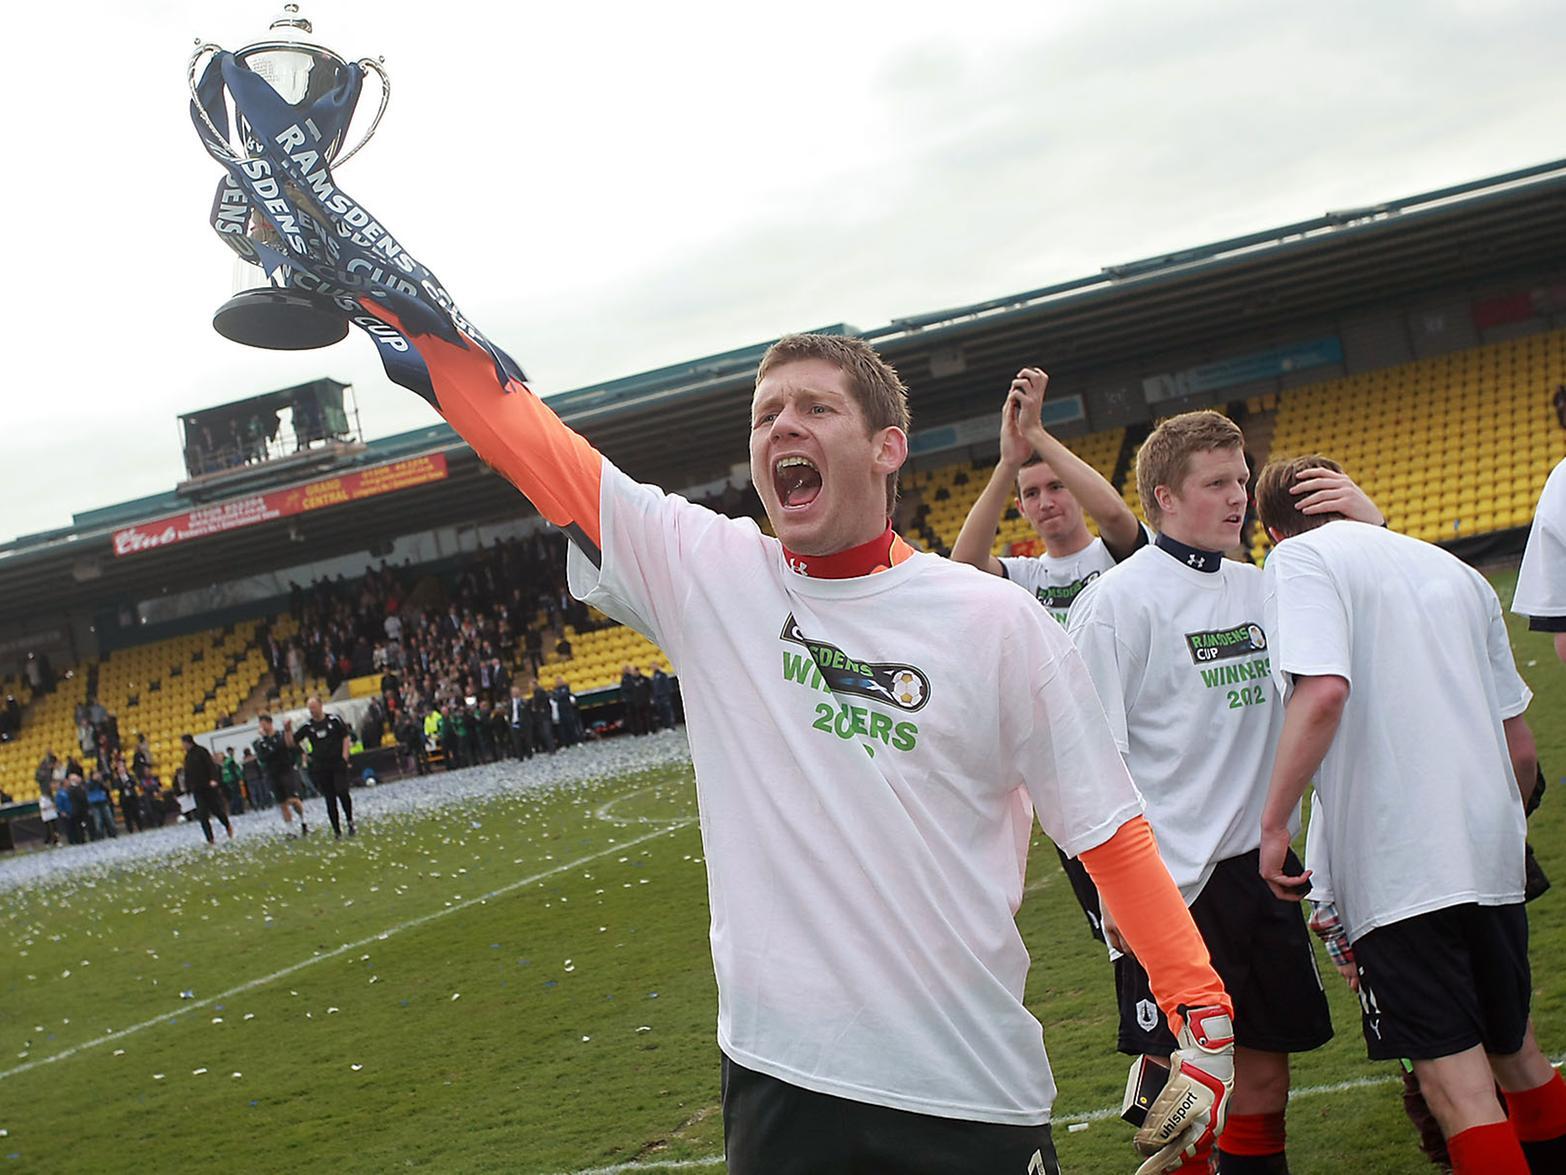 The overwhelming choice, McGovern spent three years with the Bairns winning the Ramsdens Cup and an international cap before moving to Hamilton and Norwich where he gained more Northern Ireland appearances